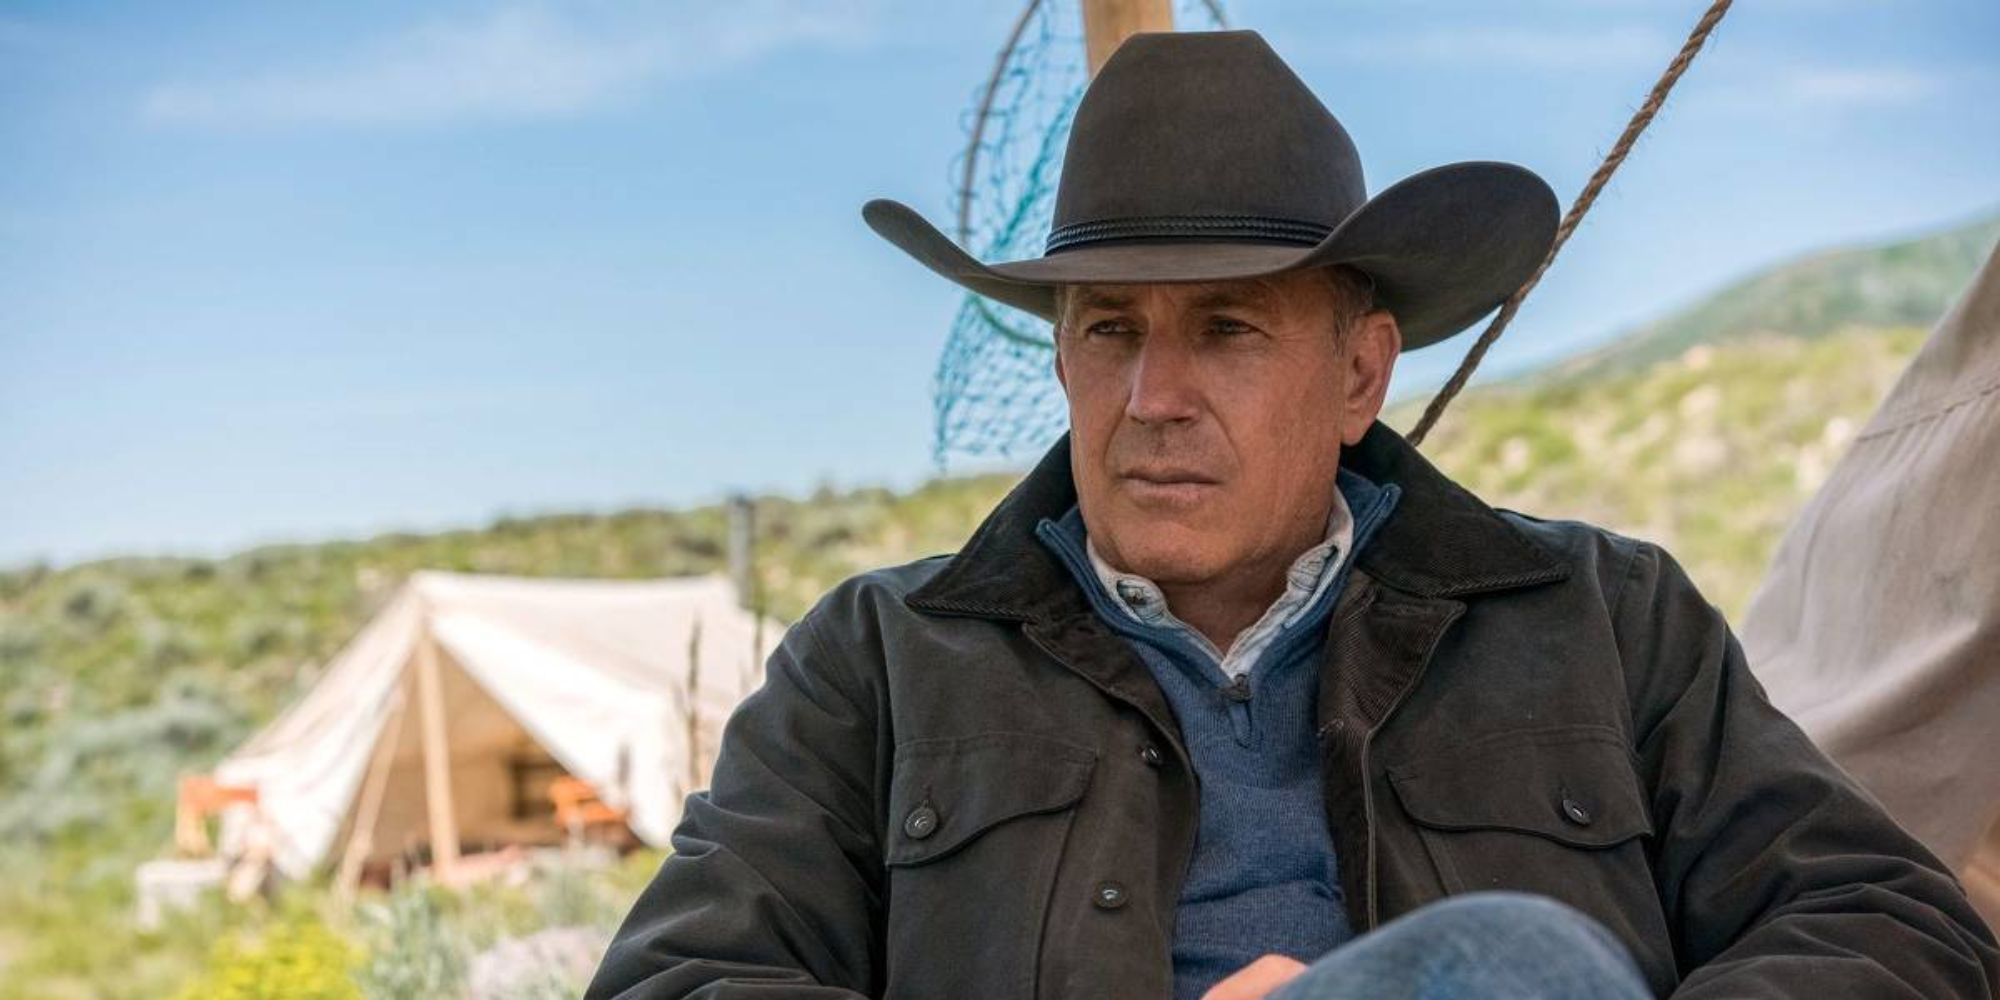 Kevin Costner in Yellowstone sitting with a cowboy hat, a tent in the background.